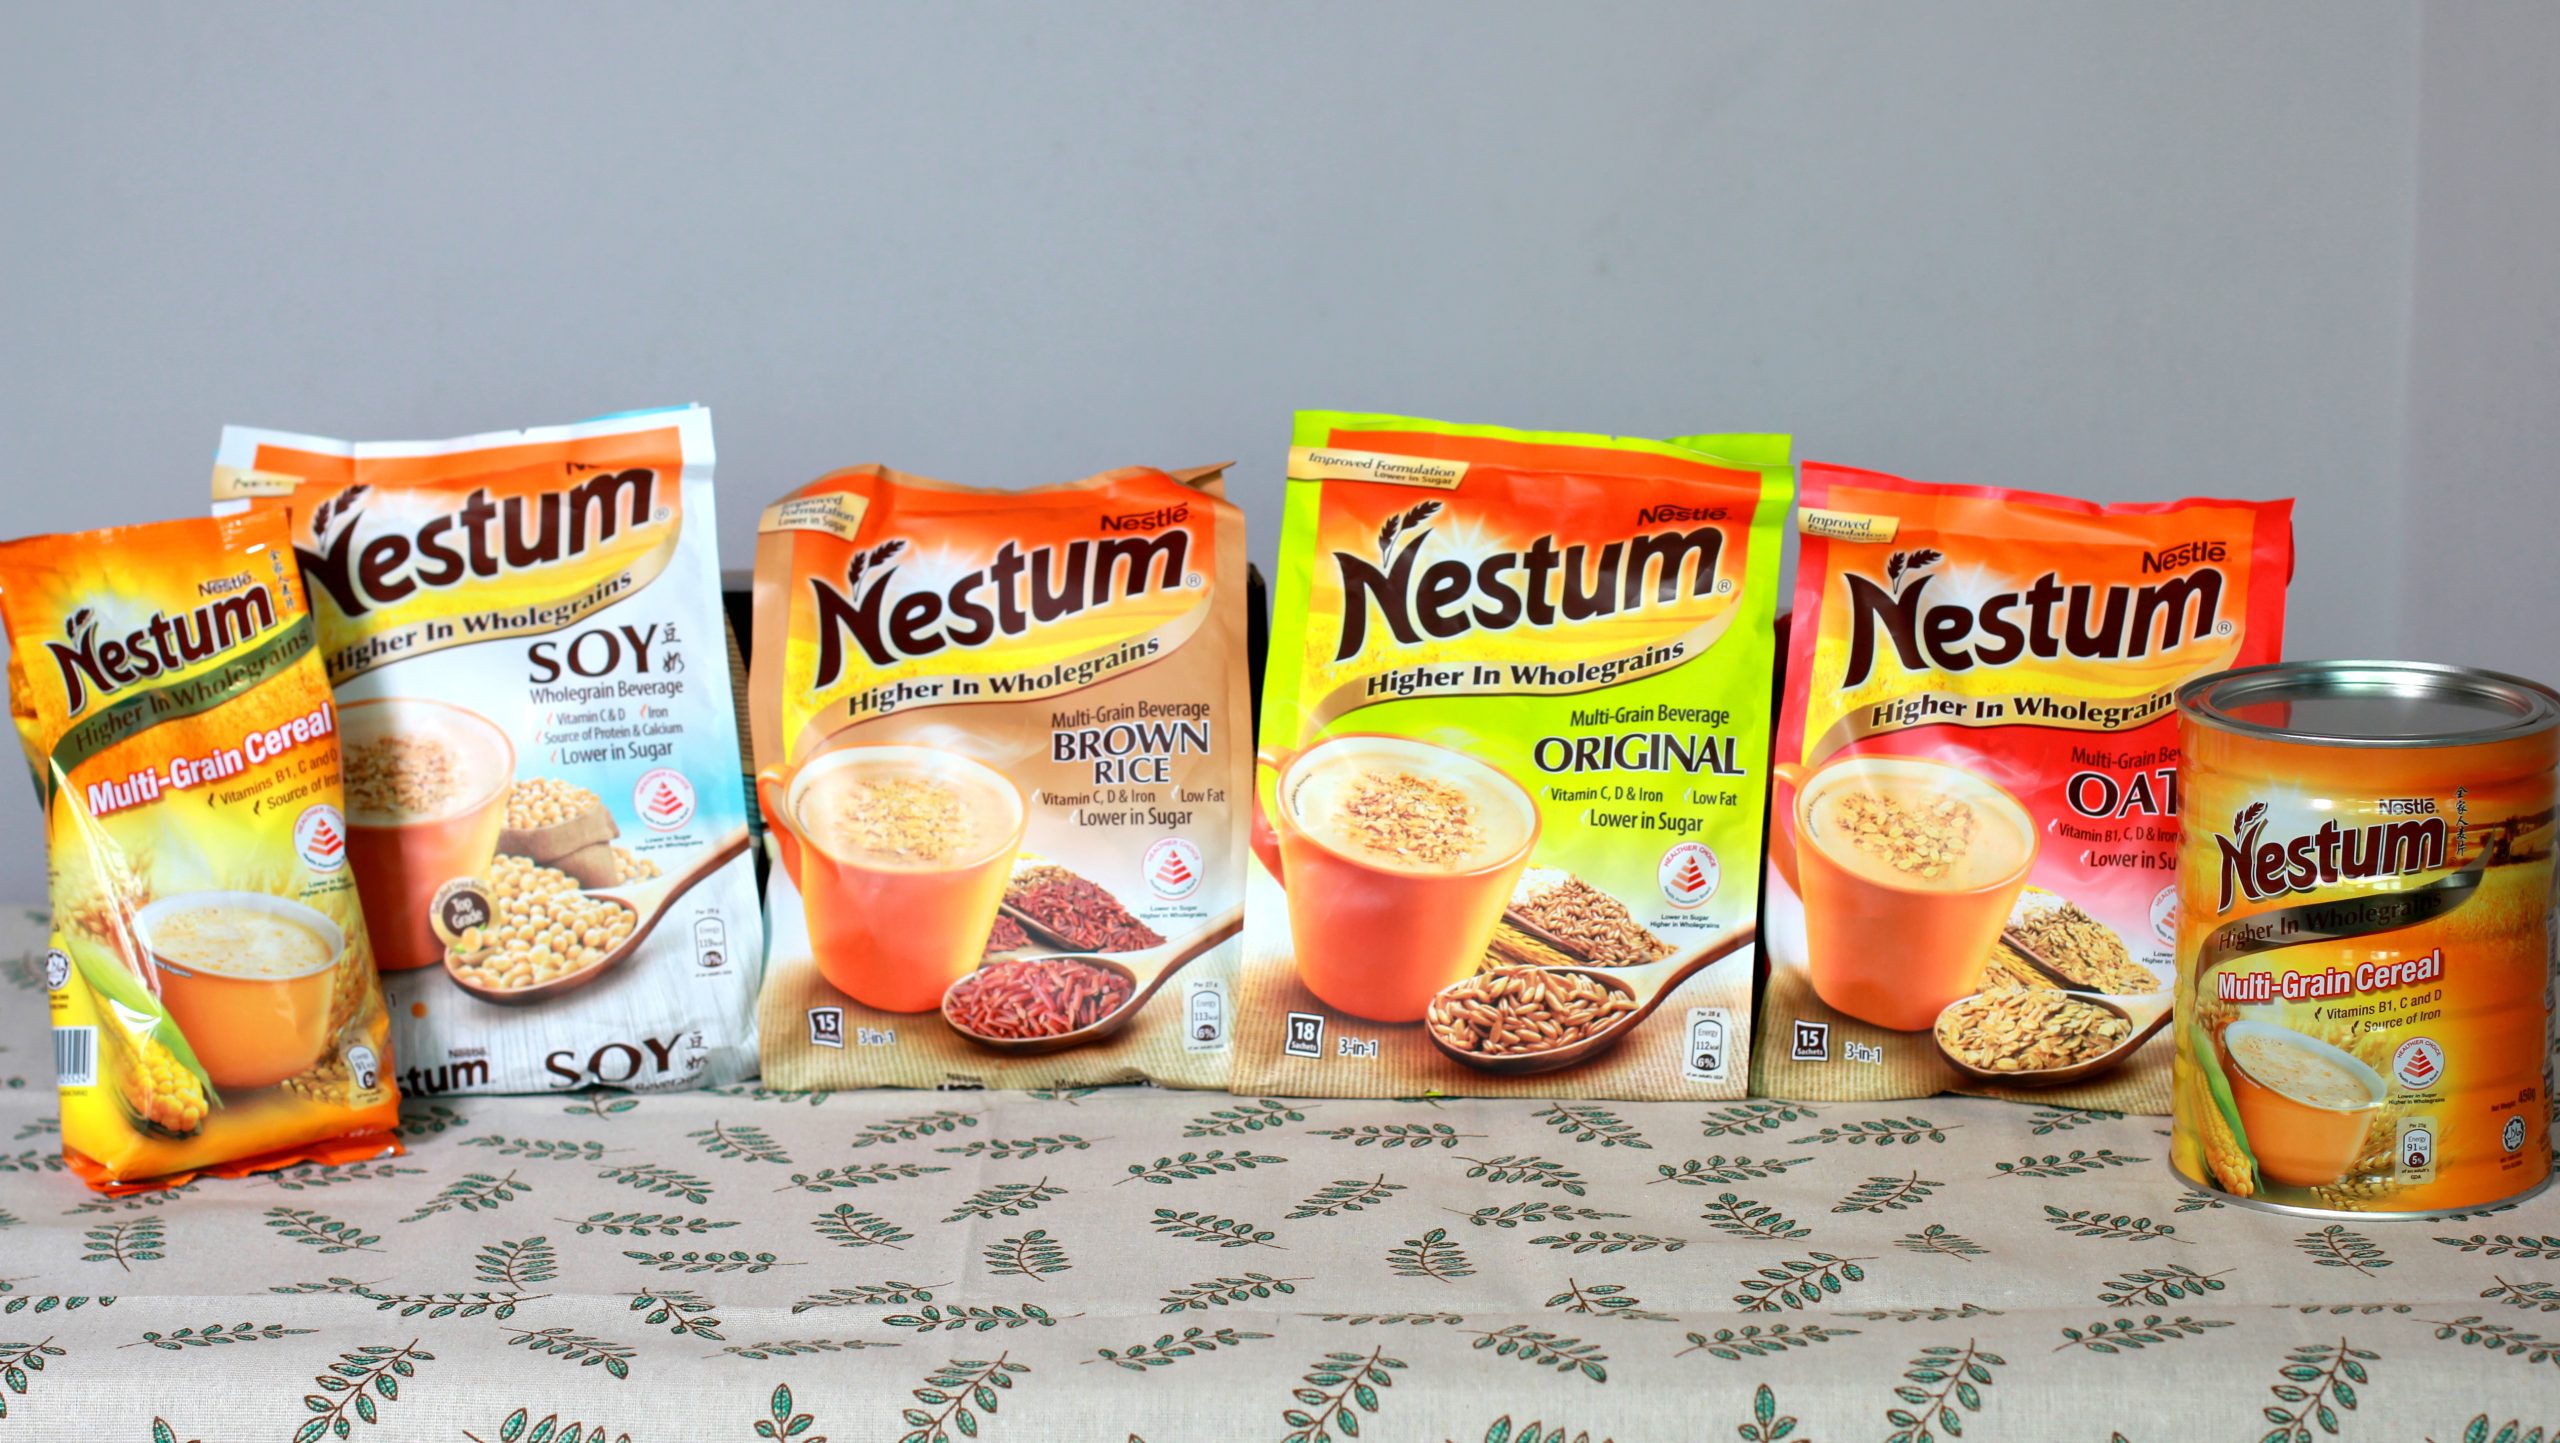 NESTLÉ NESTUM - A Favourite For All Generations - The Halal Food Blog